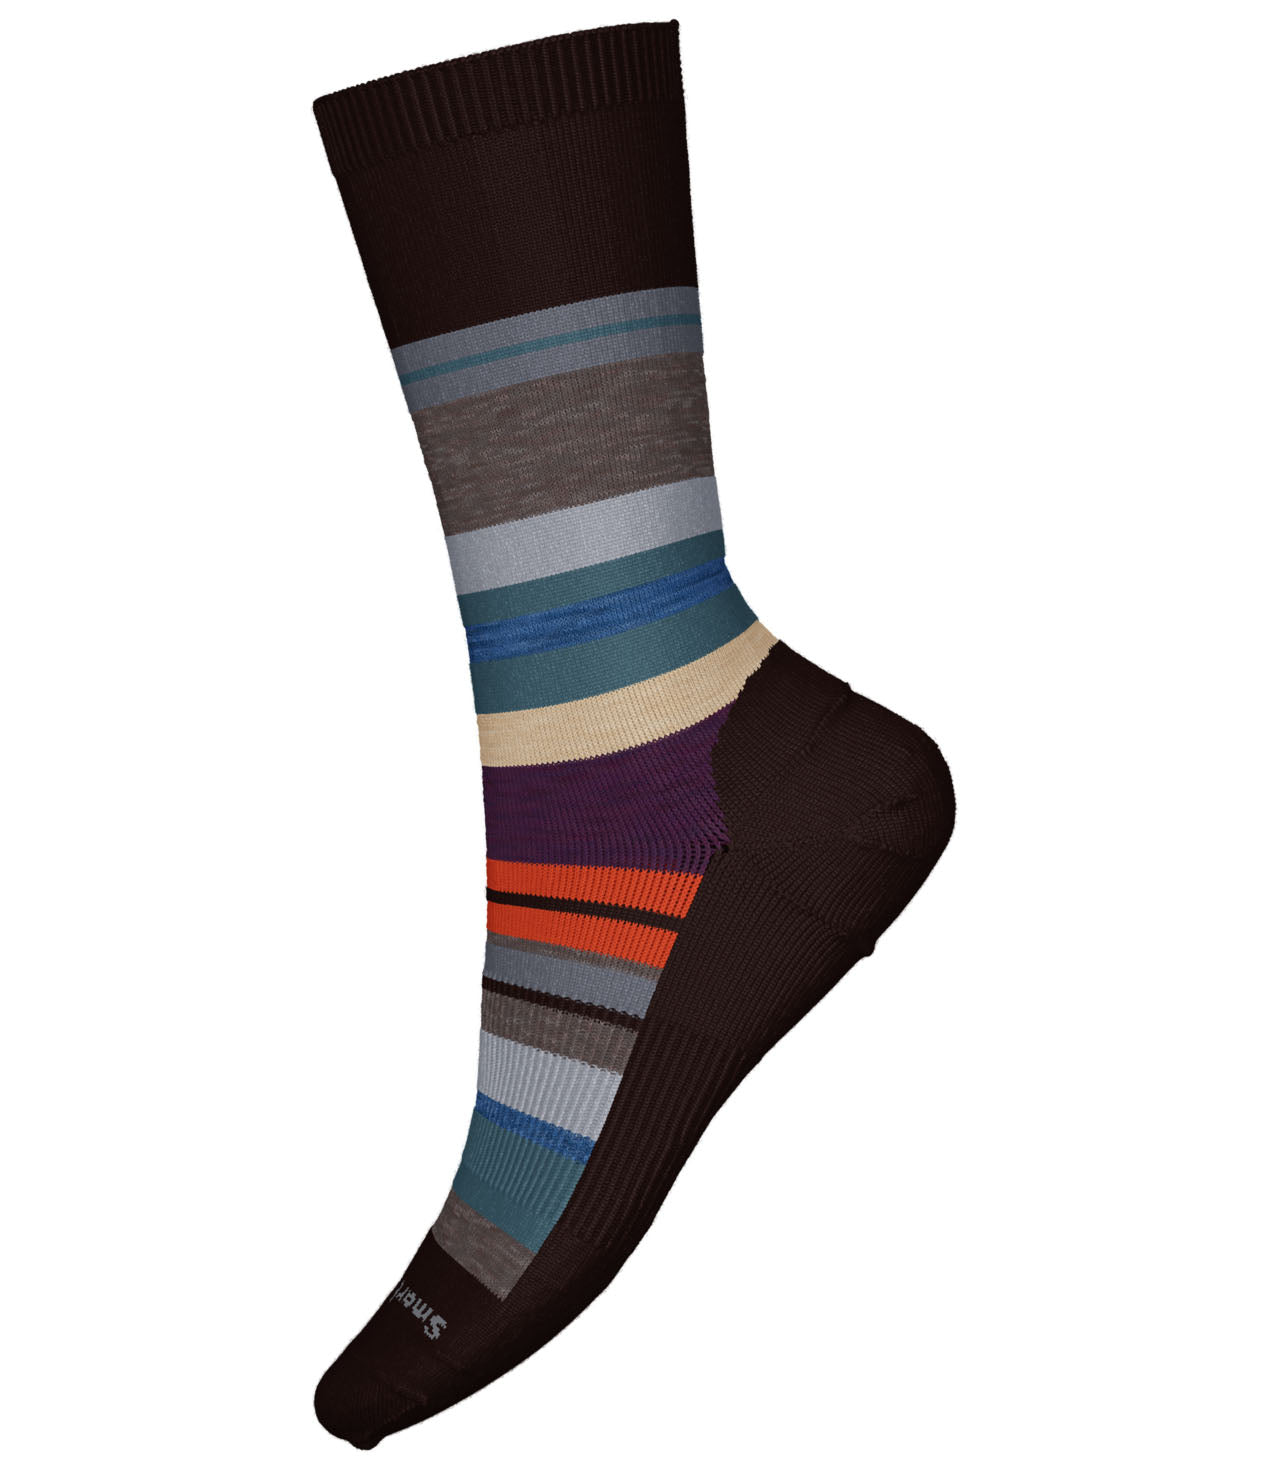 Men's Smartwool Saturnsphere Sock in Chestnut-Pine Gray from the side view